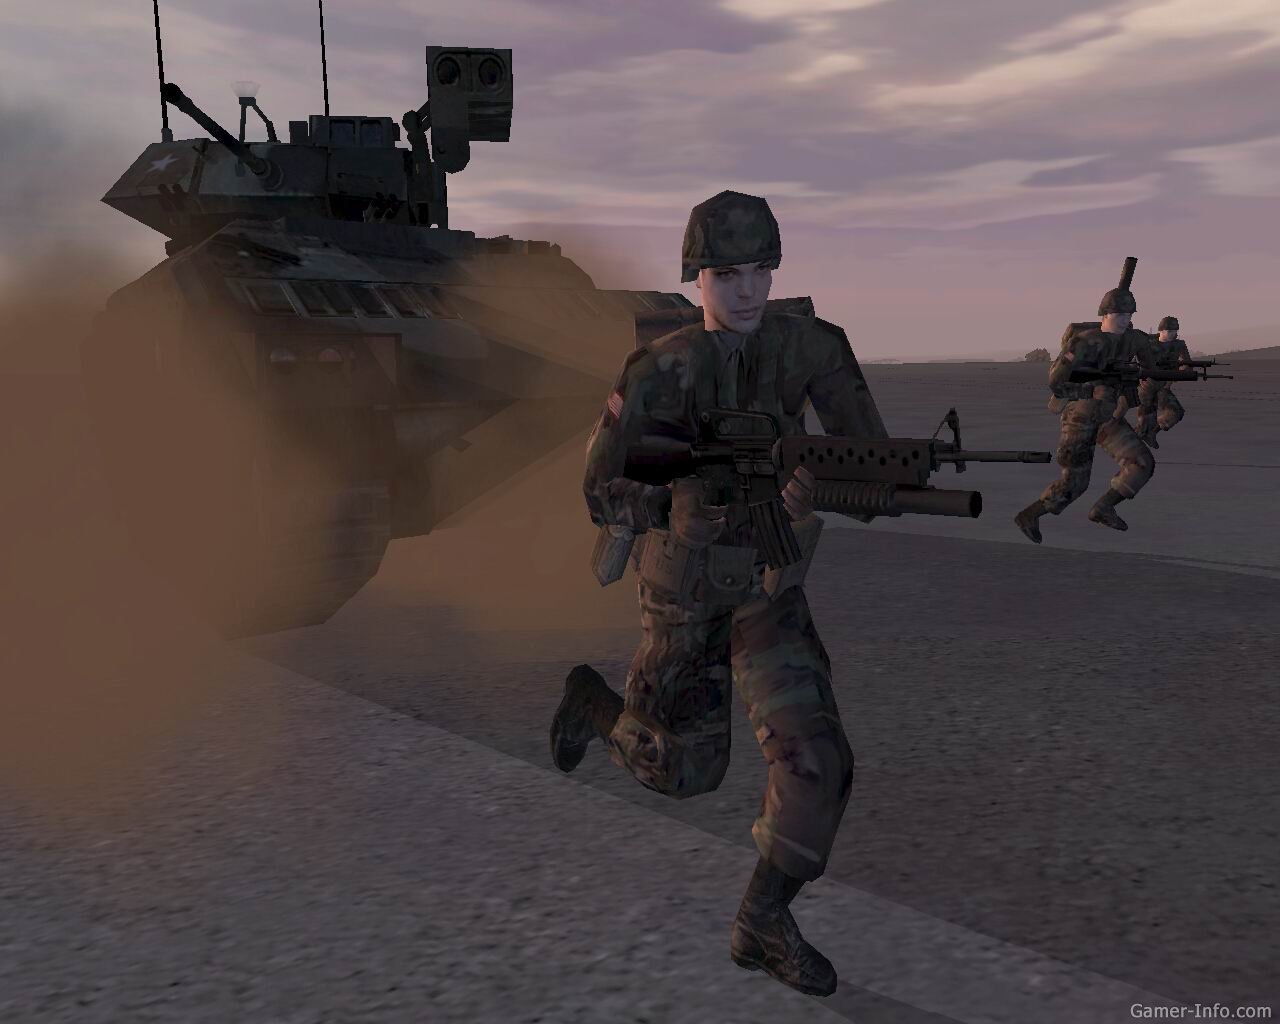 operation flashpoint cold war crisis download full game in torrent